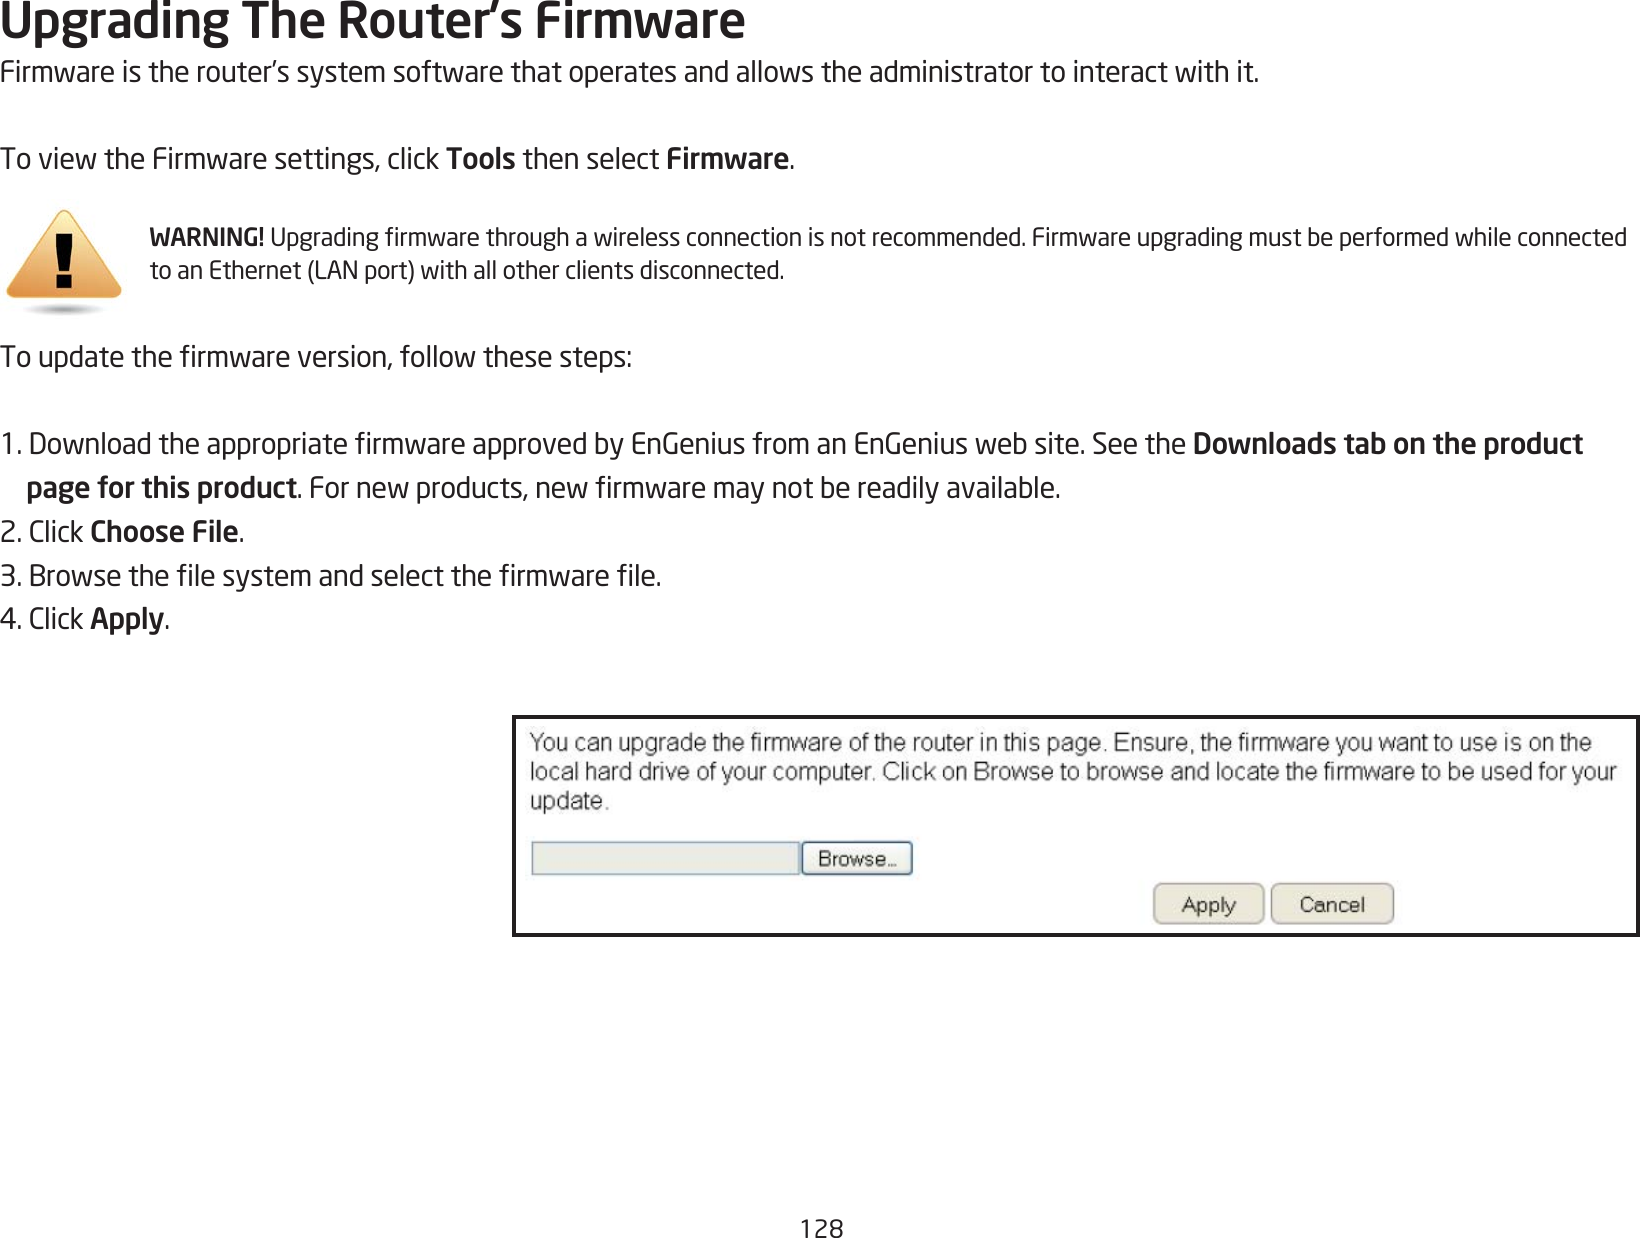 128Upgrading The Router’s FirmwareFirmwareistherouter’ssystemsoftwarethatoperatesandallowstheadministratortointeractwithit.ToviewtheFirmwaresettings,clickTools then select Firmware.WARNING! Upgradingrmwarethroughawirelessconnectionisnotrecommended.FirmwareupgradingmustbeperformedwhileconnectedtoanEthernet(LANport)withallotherclientsdisconnected.Toupdatethermwareversion,followthesesteps:1.DownloadtheappropriatermwareapprovedbyEnGeniusfromanEnGeniuswebsite.SeetheDownloads tab on the product     page for this product.Fornewproducts,newrmwaremaynotbereadilyavailable.2.ClickChoose File.3.Browsethelesystemandselectthermwarele.4.ClickApply.